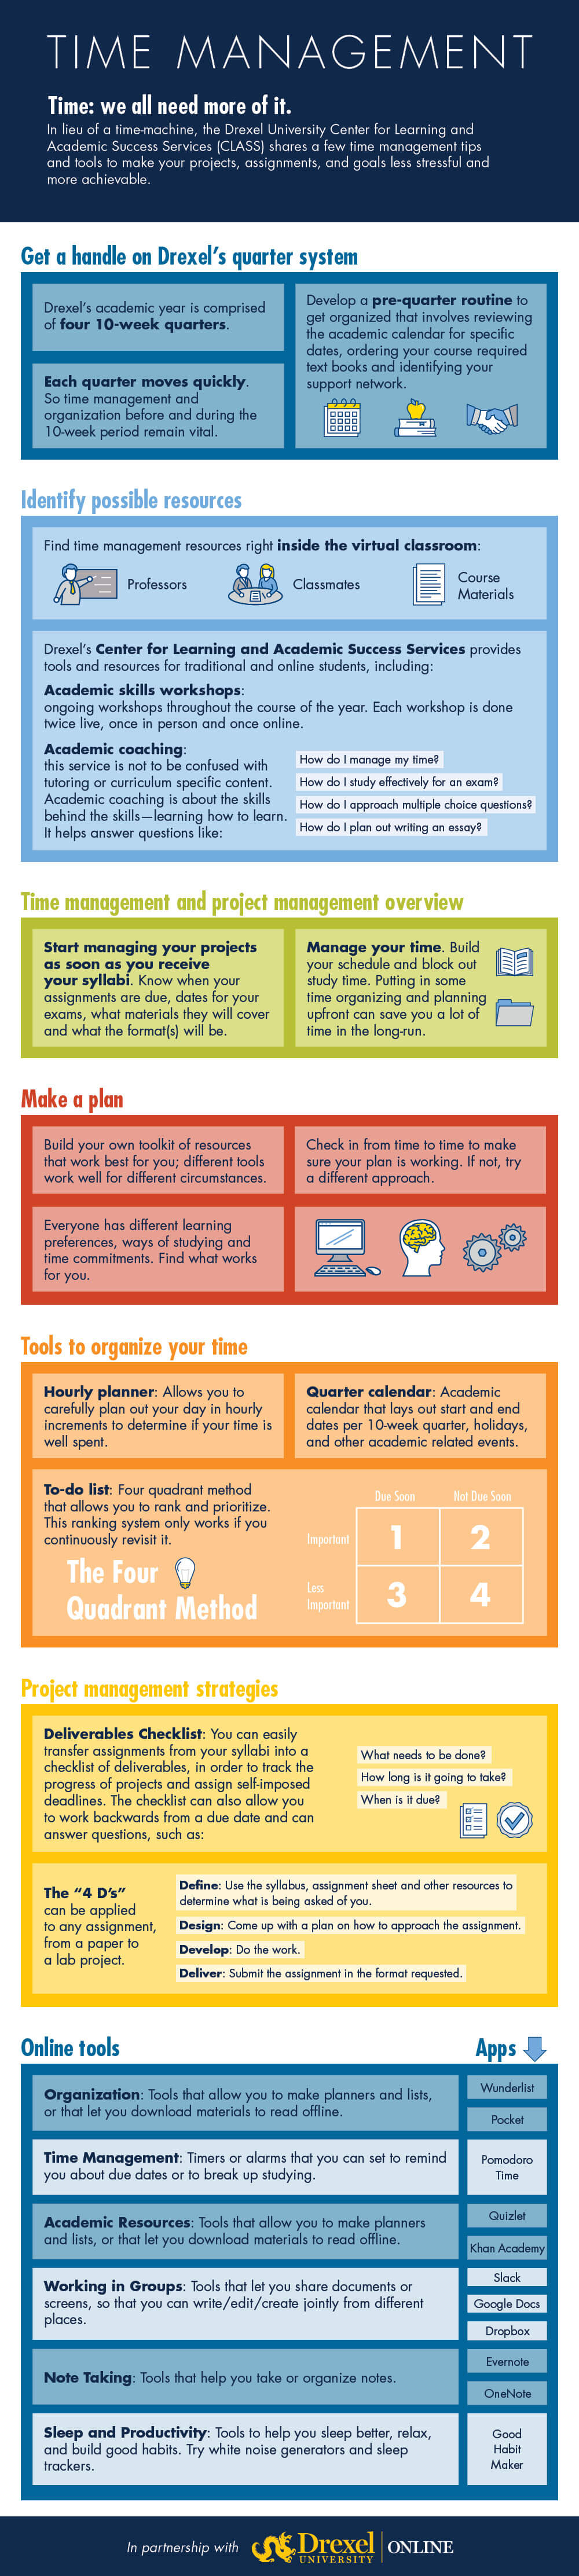 Time Management Infographic